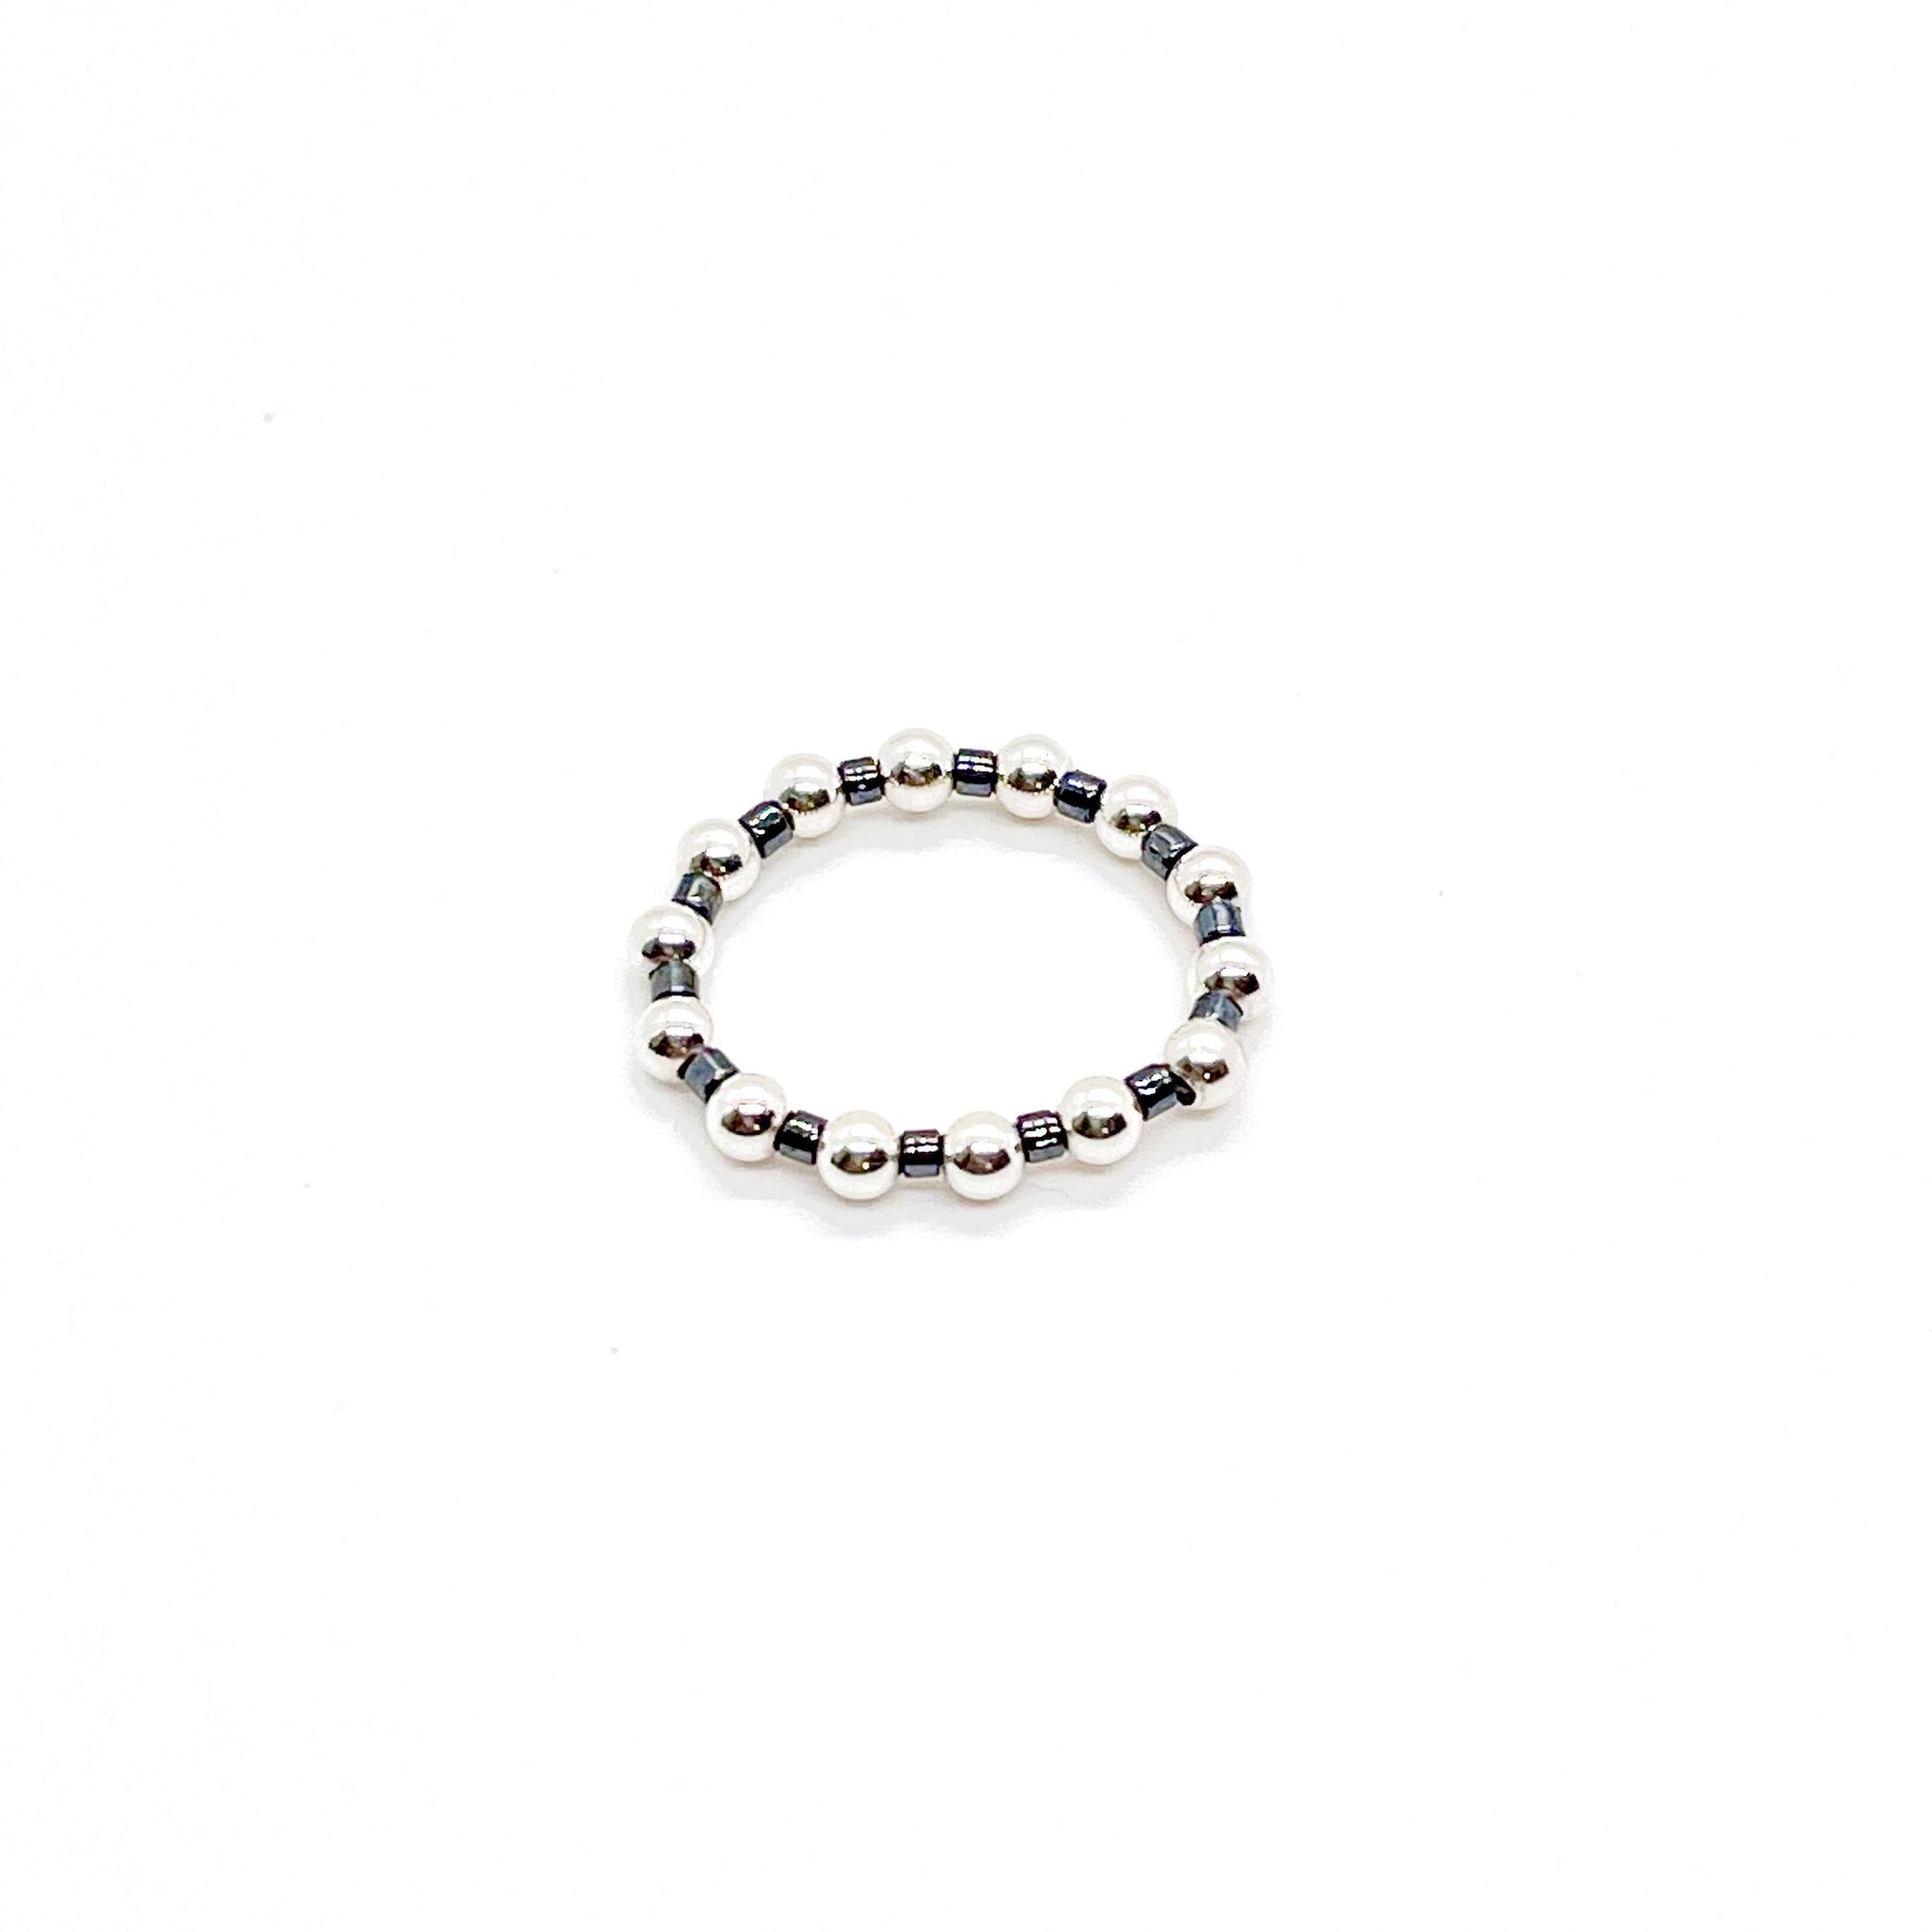 Beaded ring | 3mm sterling silver ball ring with black seed beads on stretch cord.